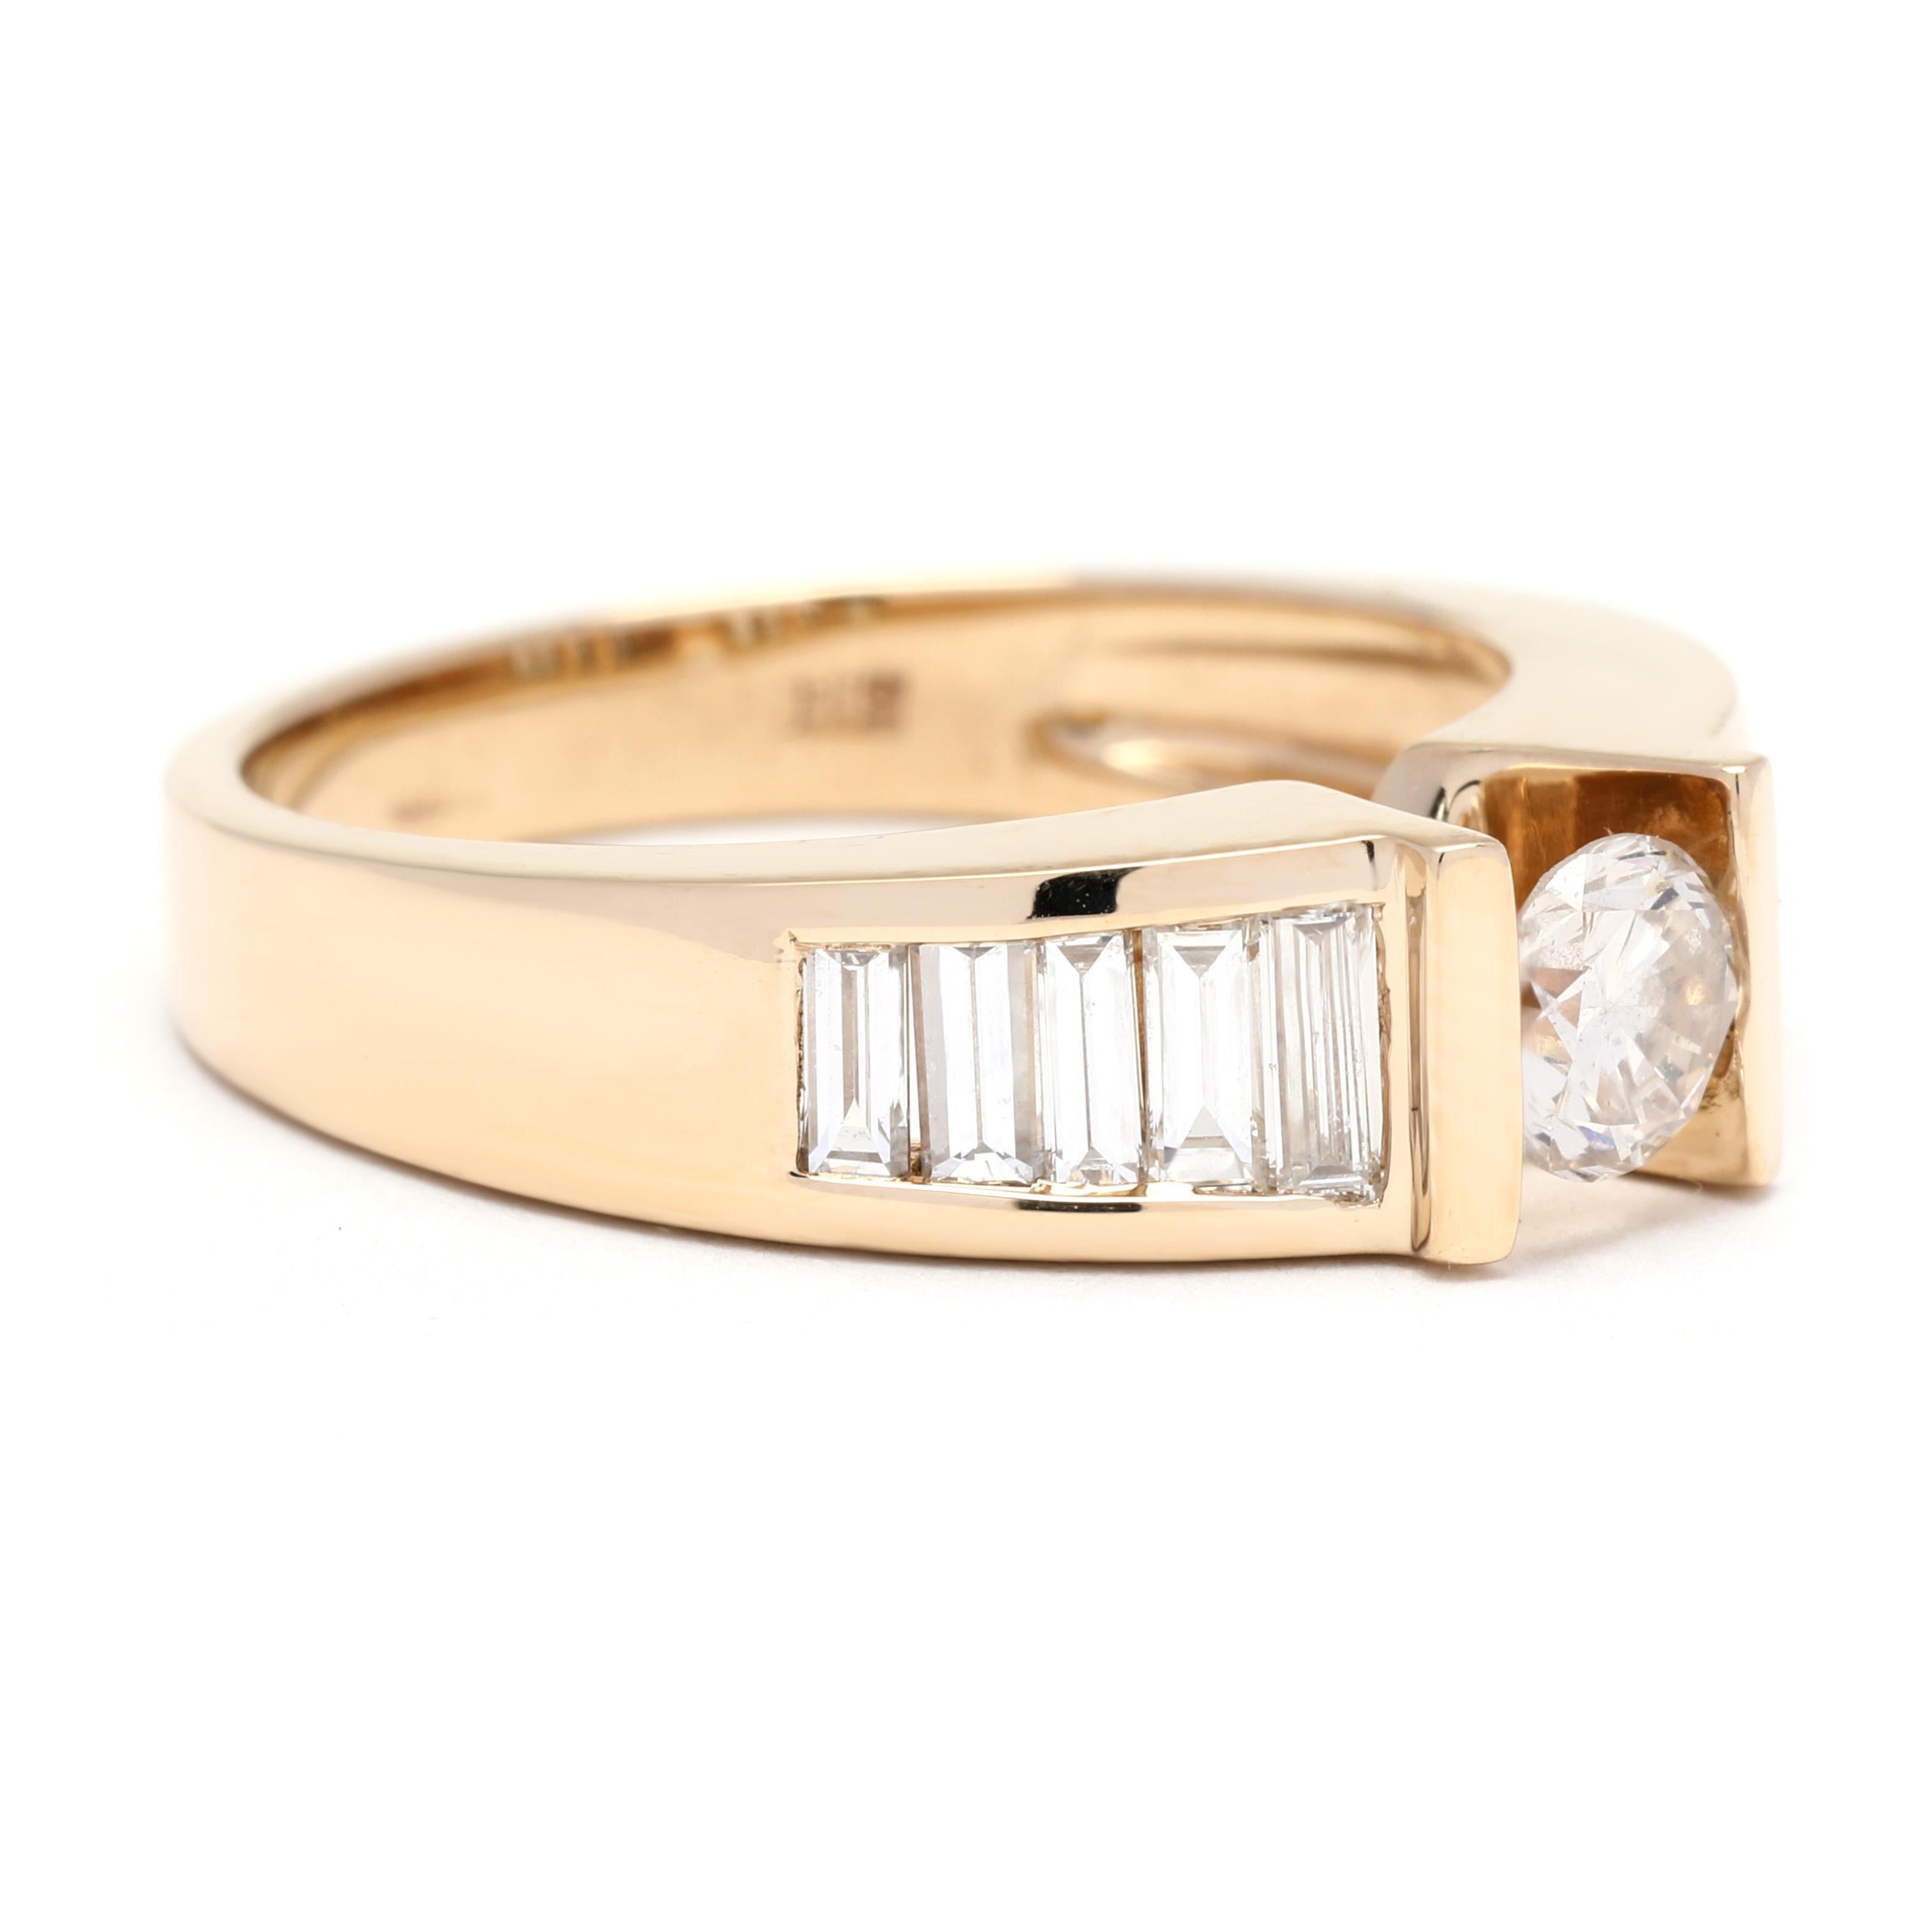 This modern diamond engagement ring is a true showstopper. Crafted in 14K yellow gold, this ring features a stunning baguette diamond center stone with a total carat weight of 1.95. The sleek and contemporary design of this ring is perfect for those